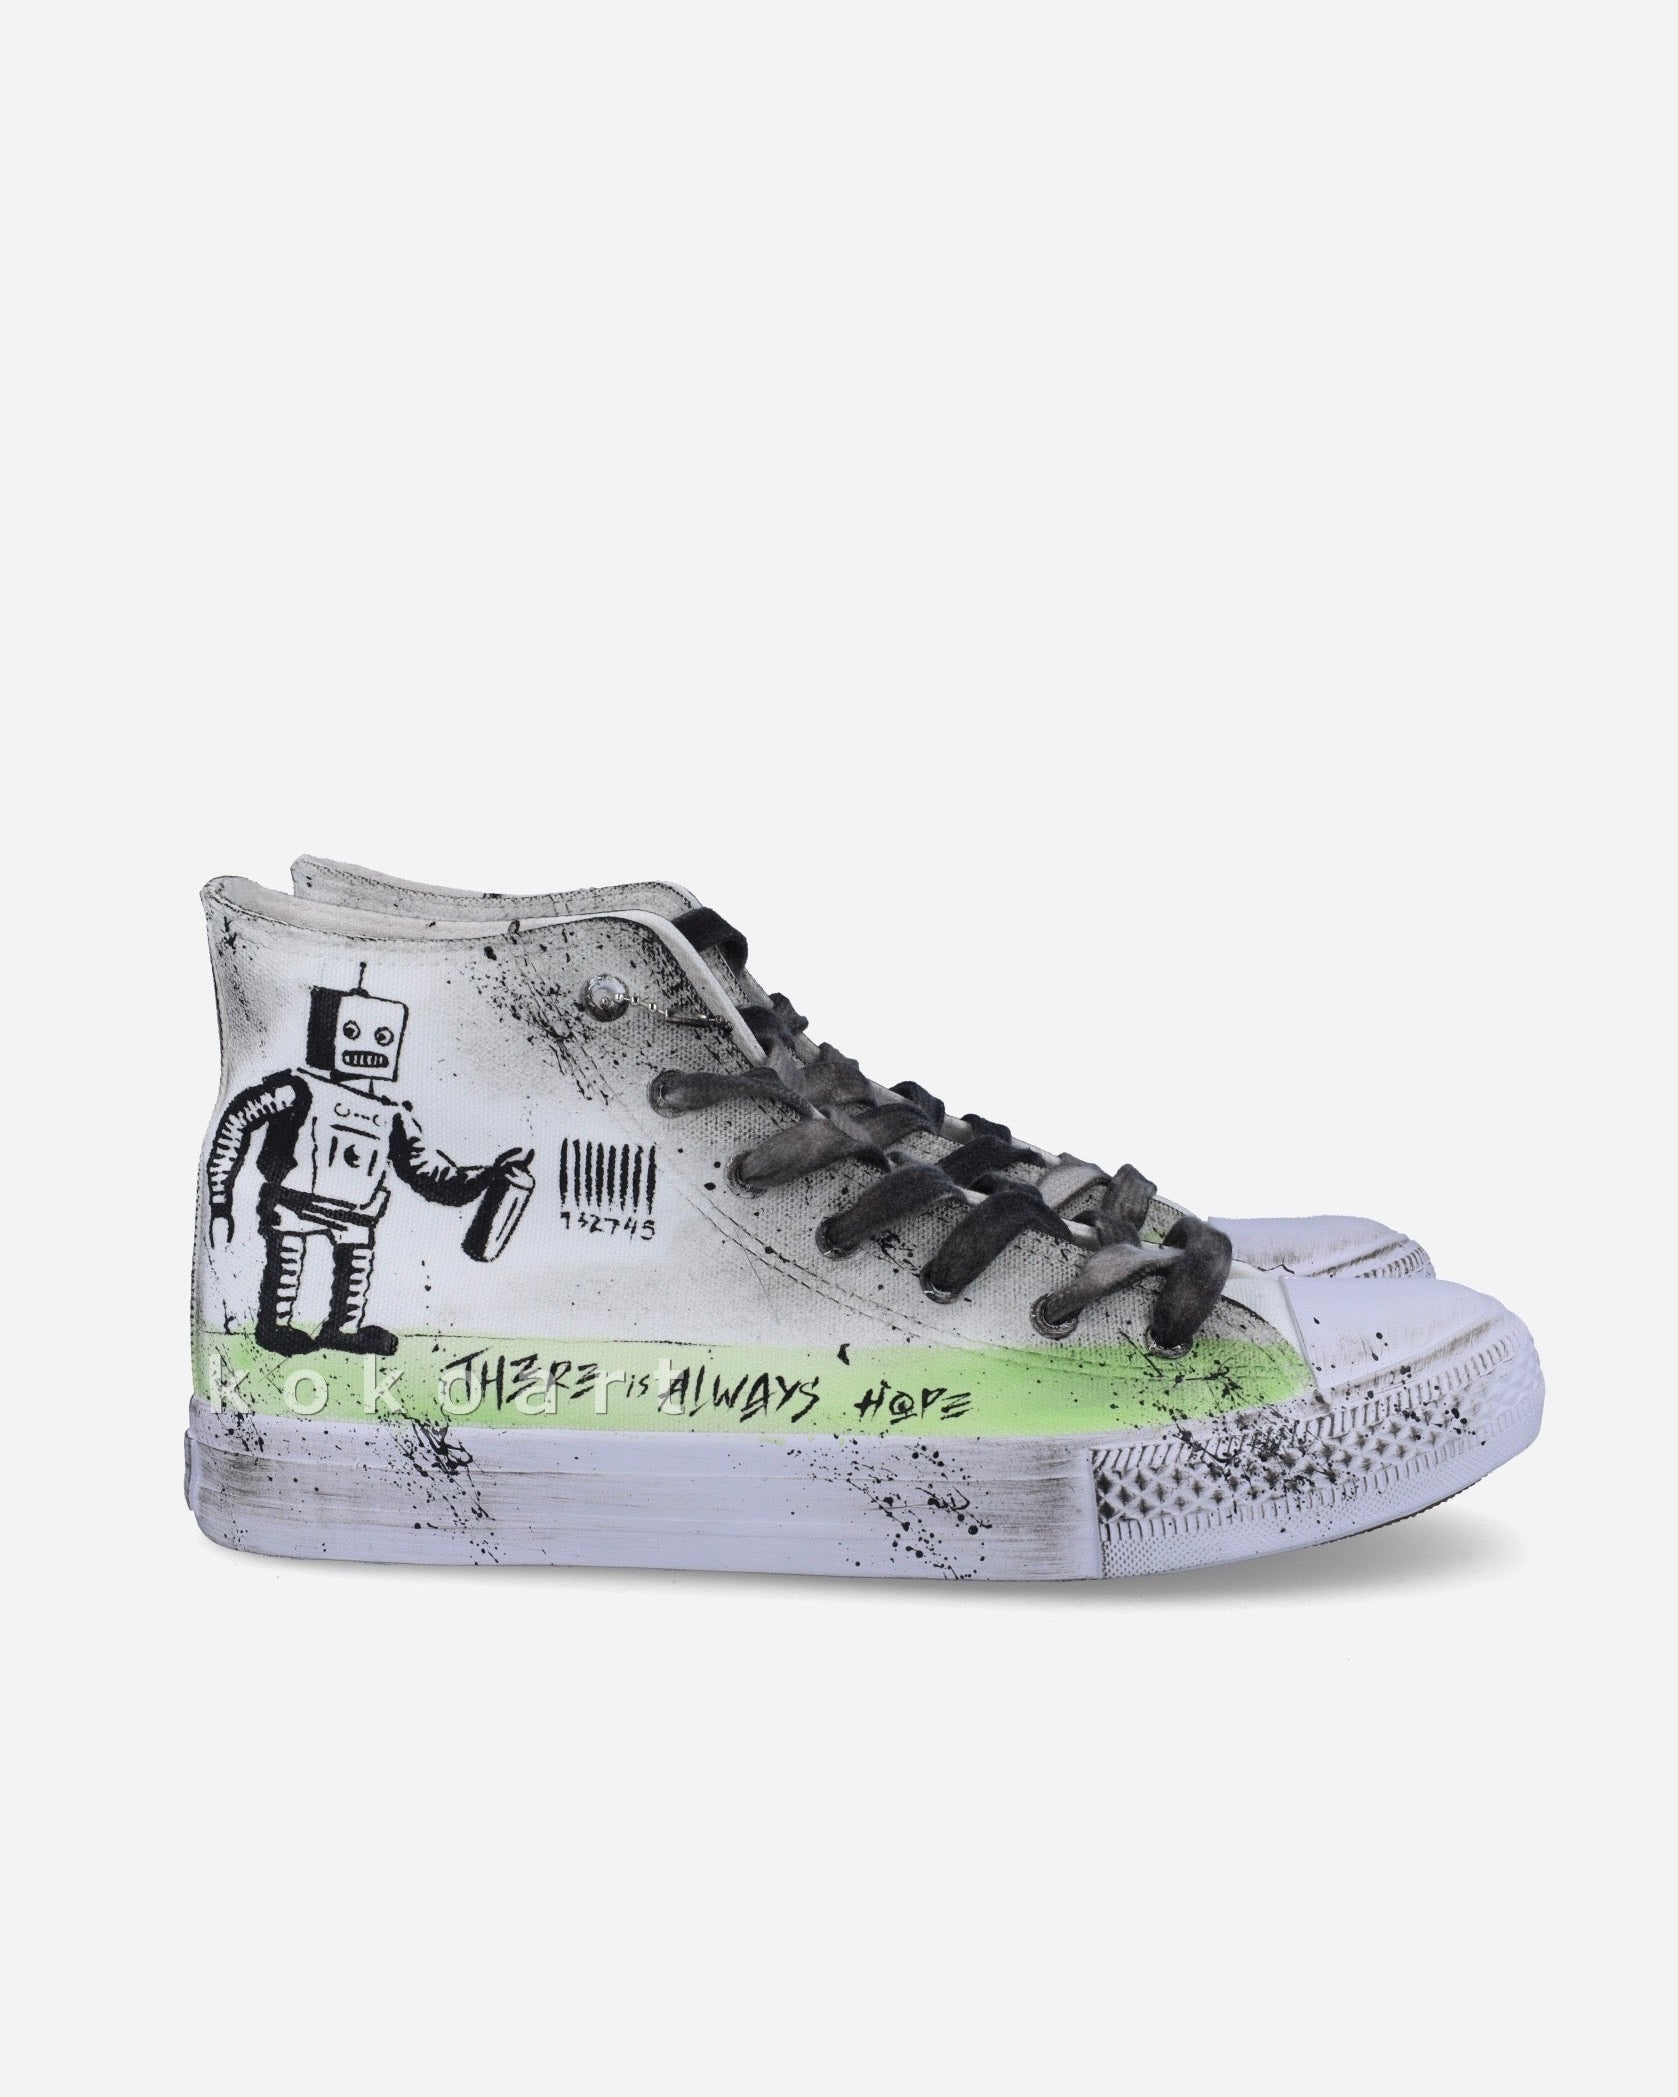 Graffiti Hand Painted Shoes